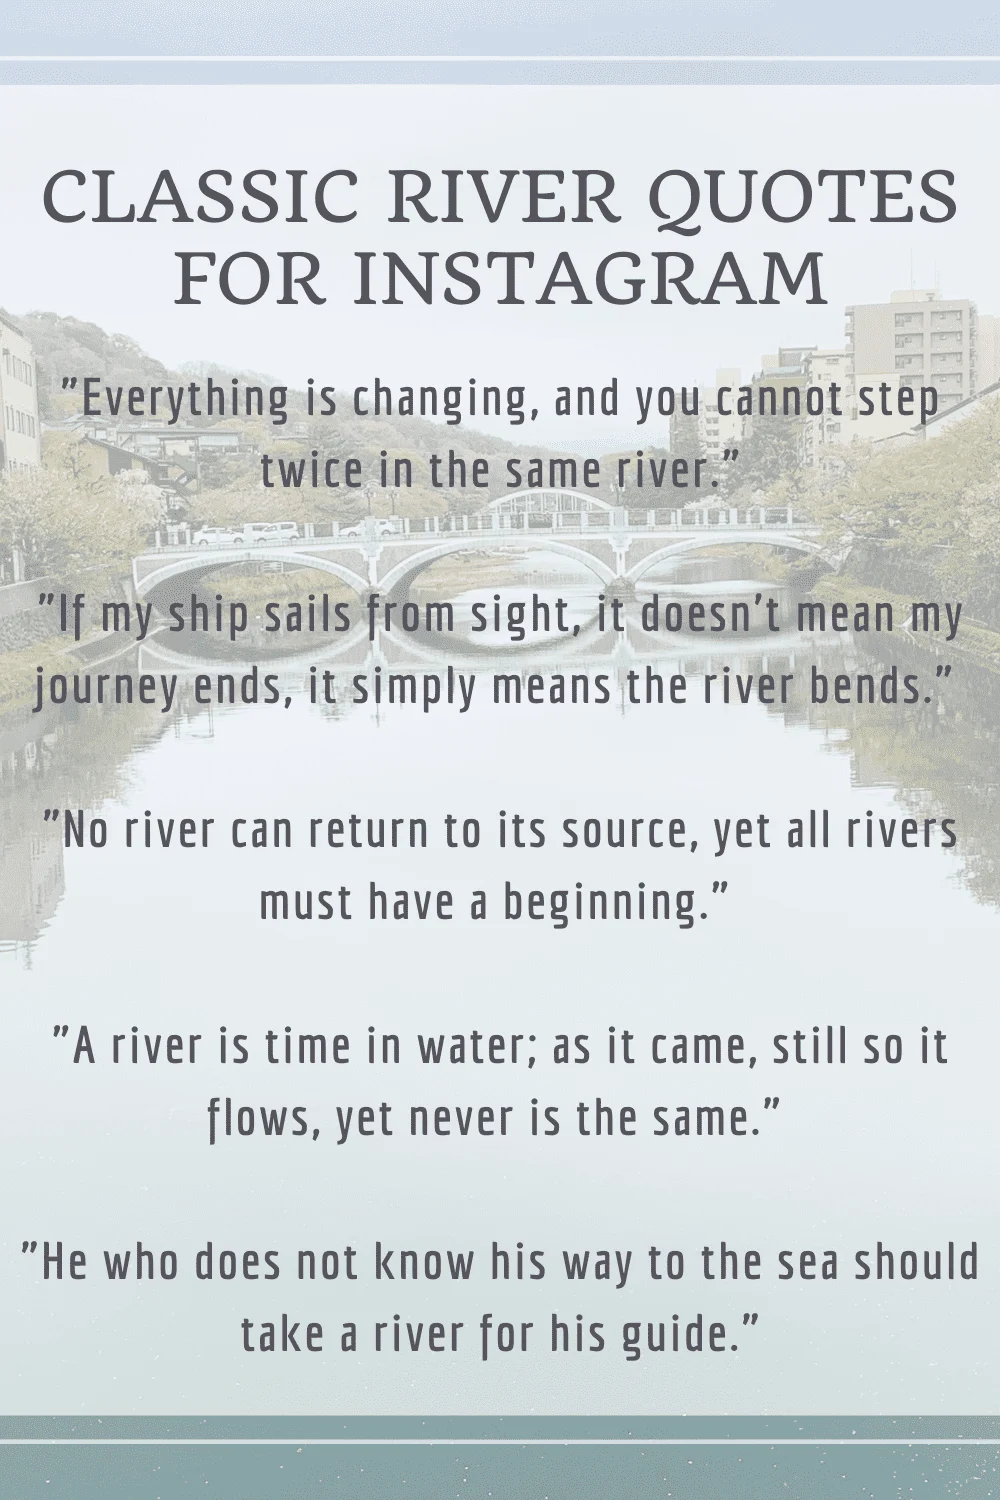 Classic River Quotes for Instagram